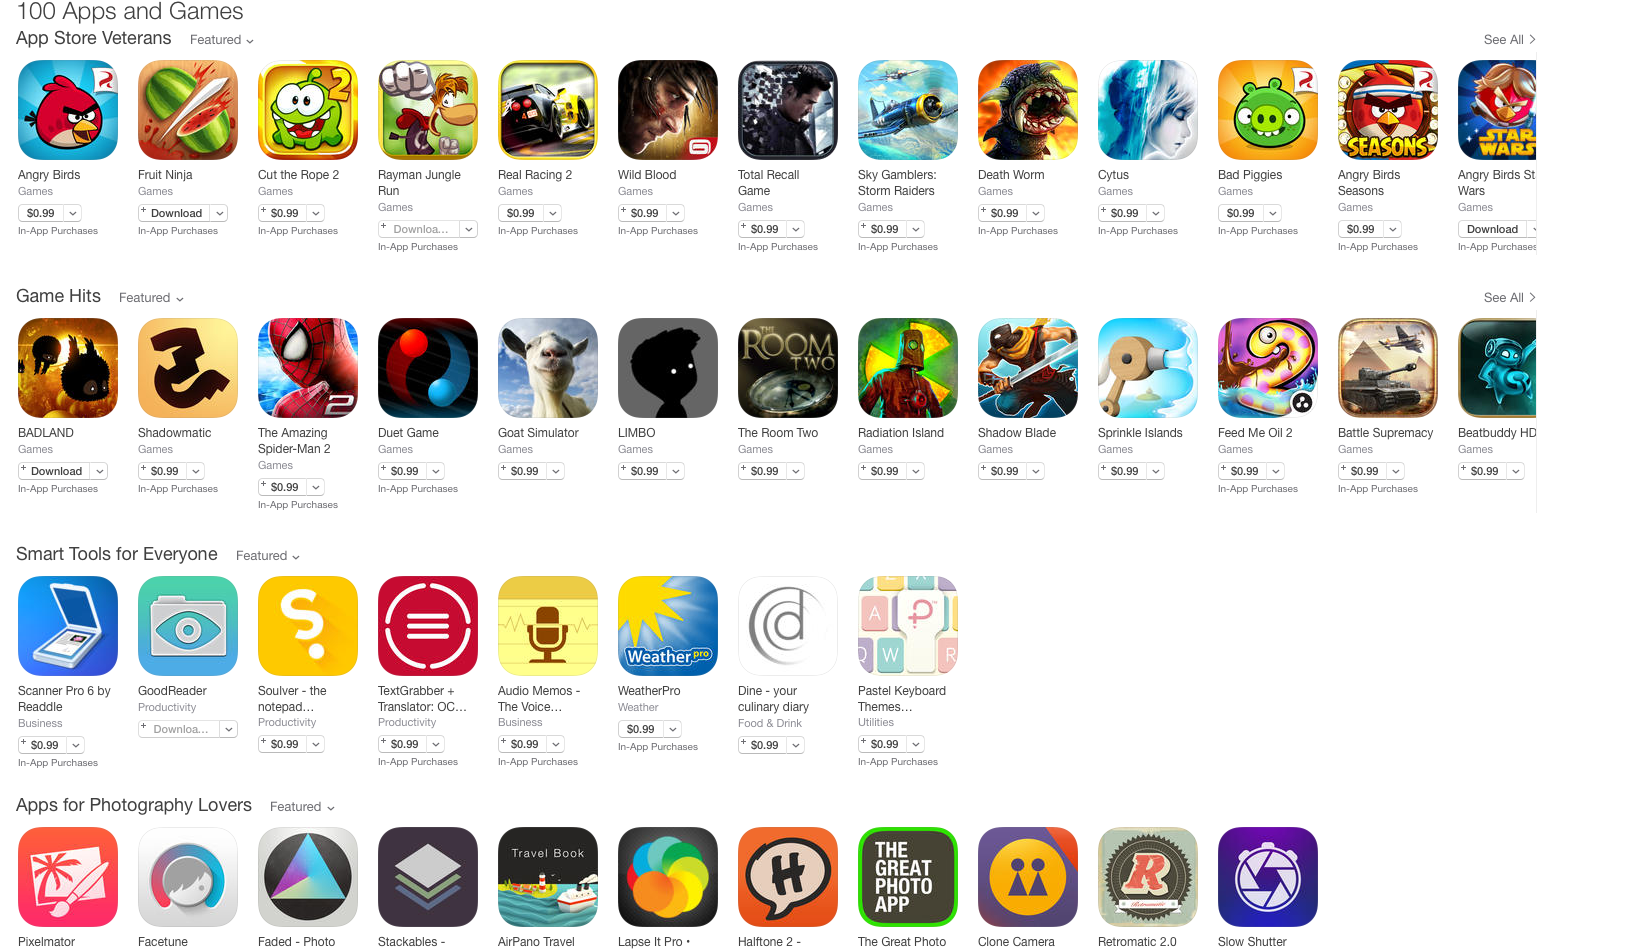 Apple launches massive iOS sale w/ 100 apps for $0.99 ea: Rayman, Angry